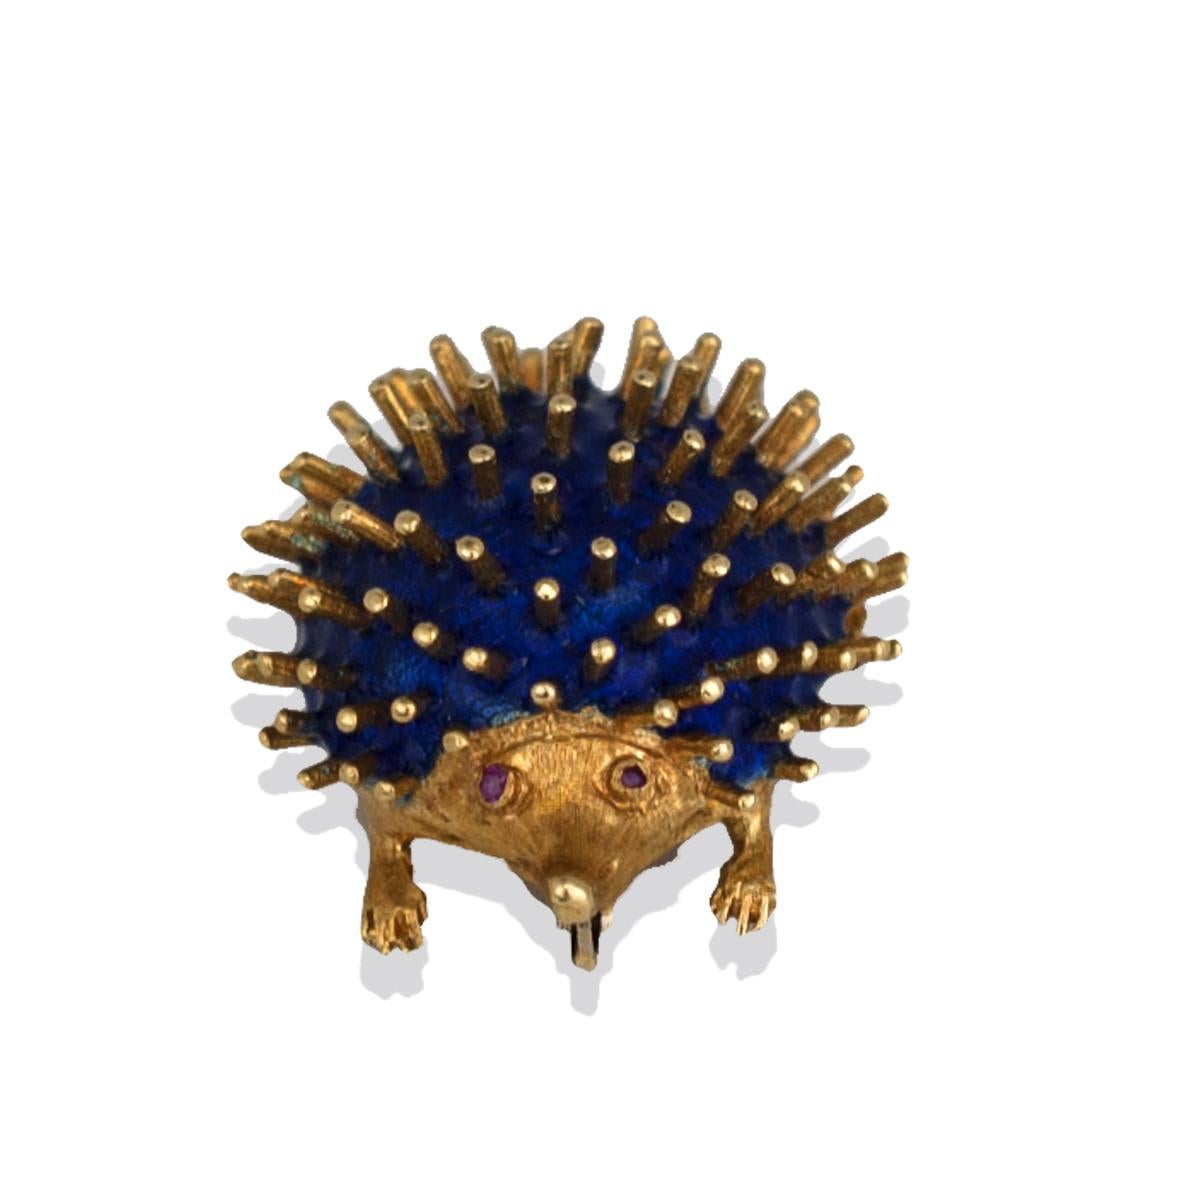 Royal Blue Enameled, Hedgehog Ruby Pin, Hallmarked, CG, 750 Gold In Good Condition For Sale In Aliso Viejo, CA